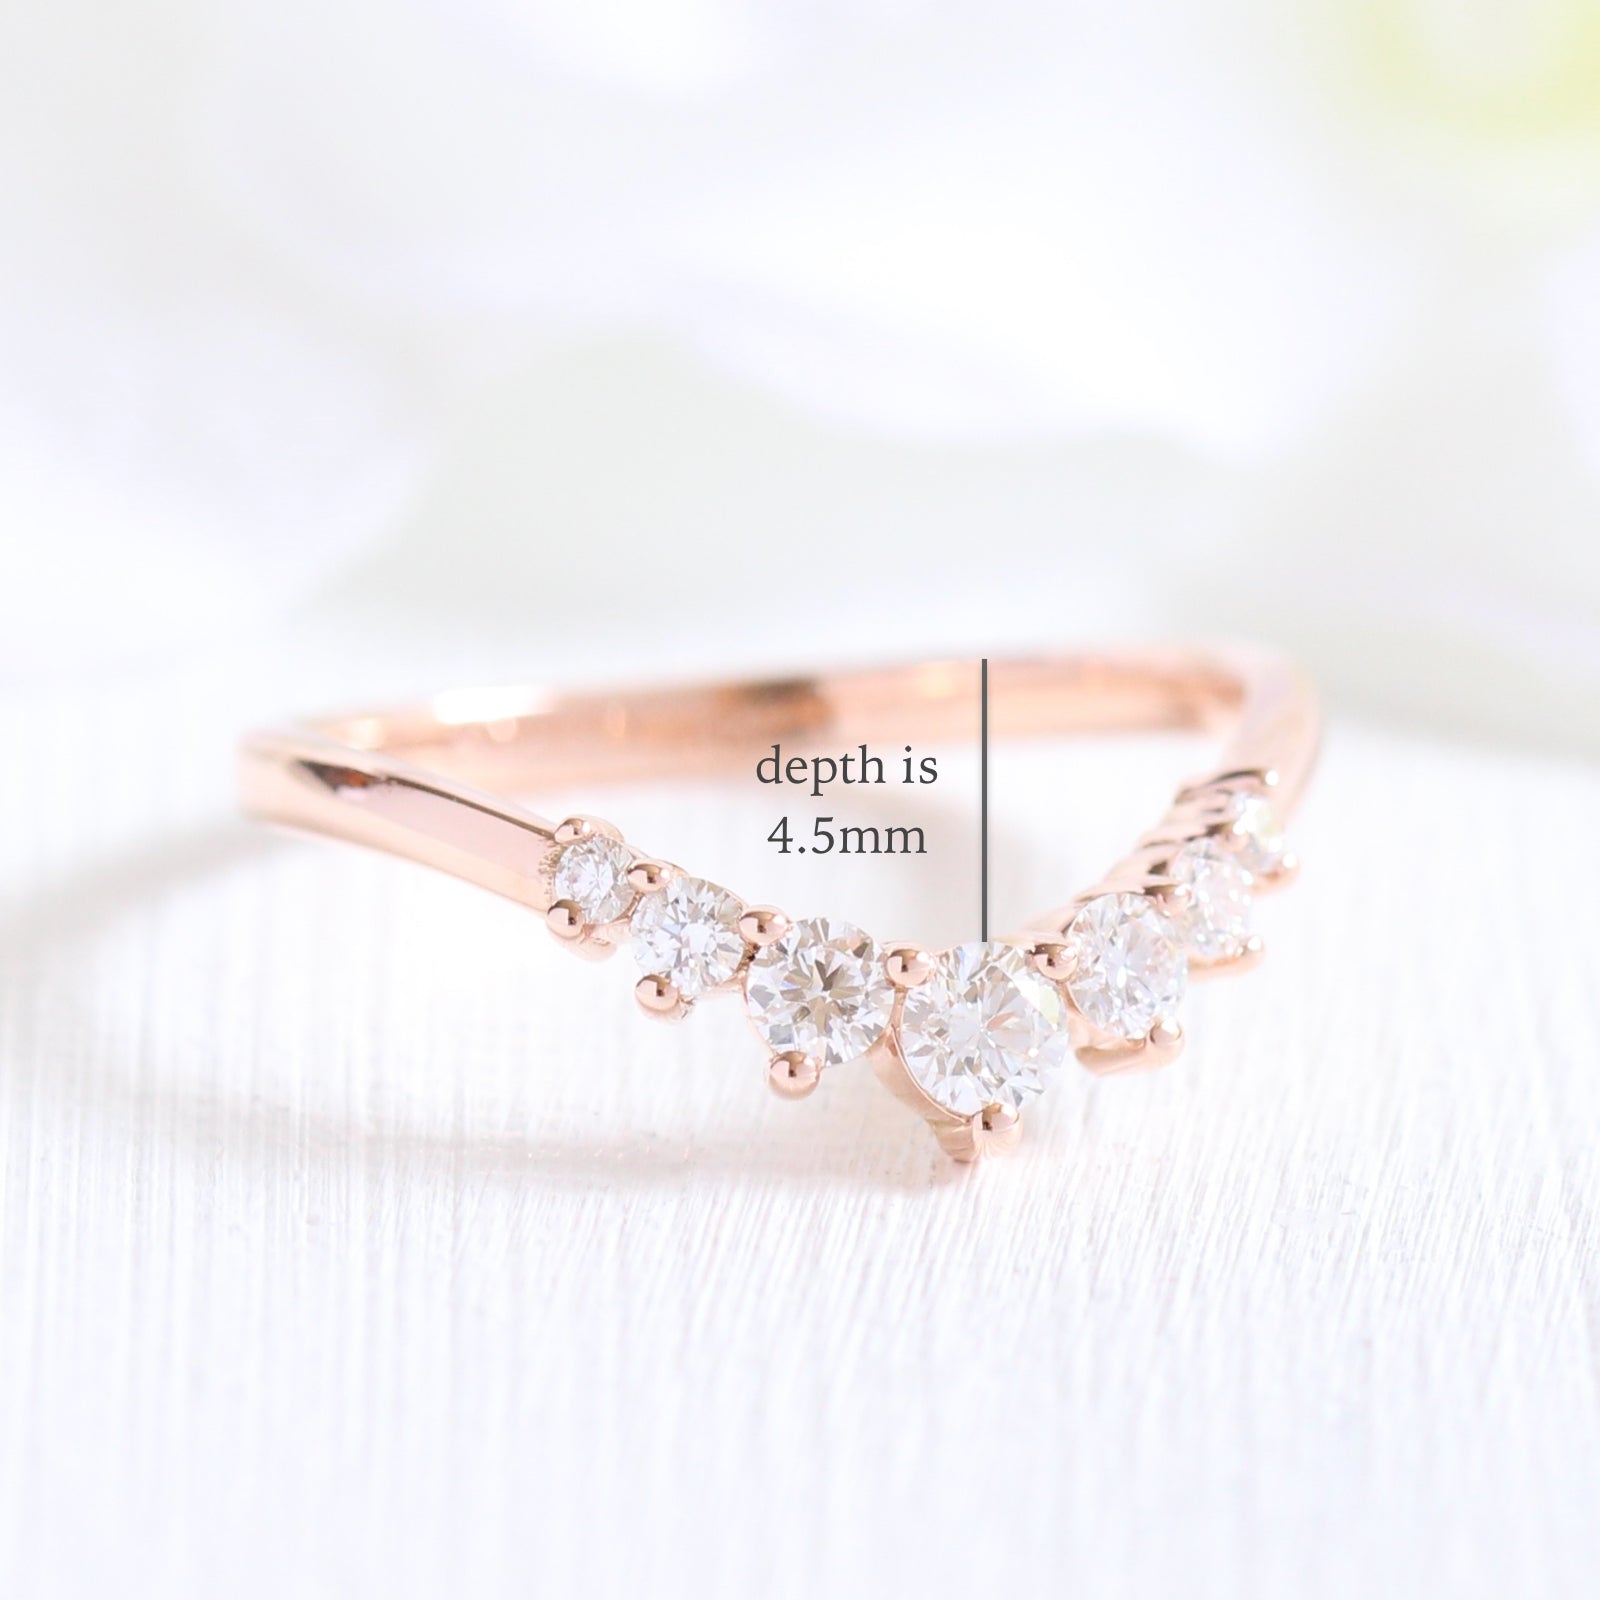 7 stone diamond wedding ring in rose gold curved band by la more design jewelry